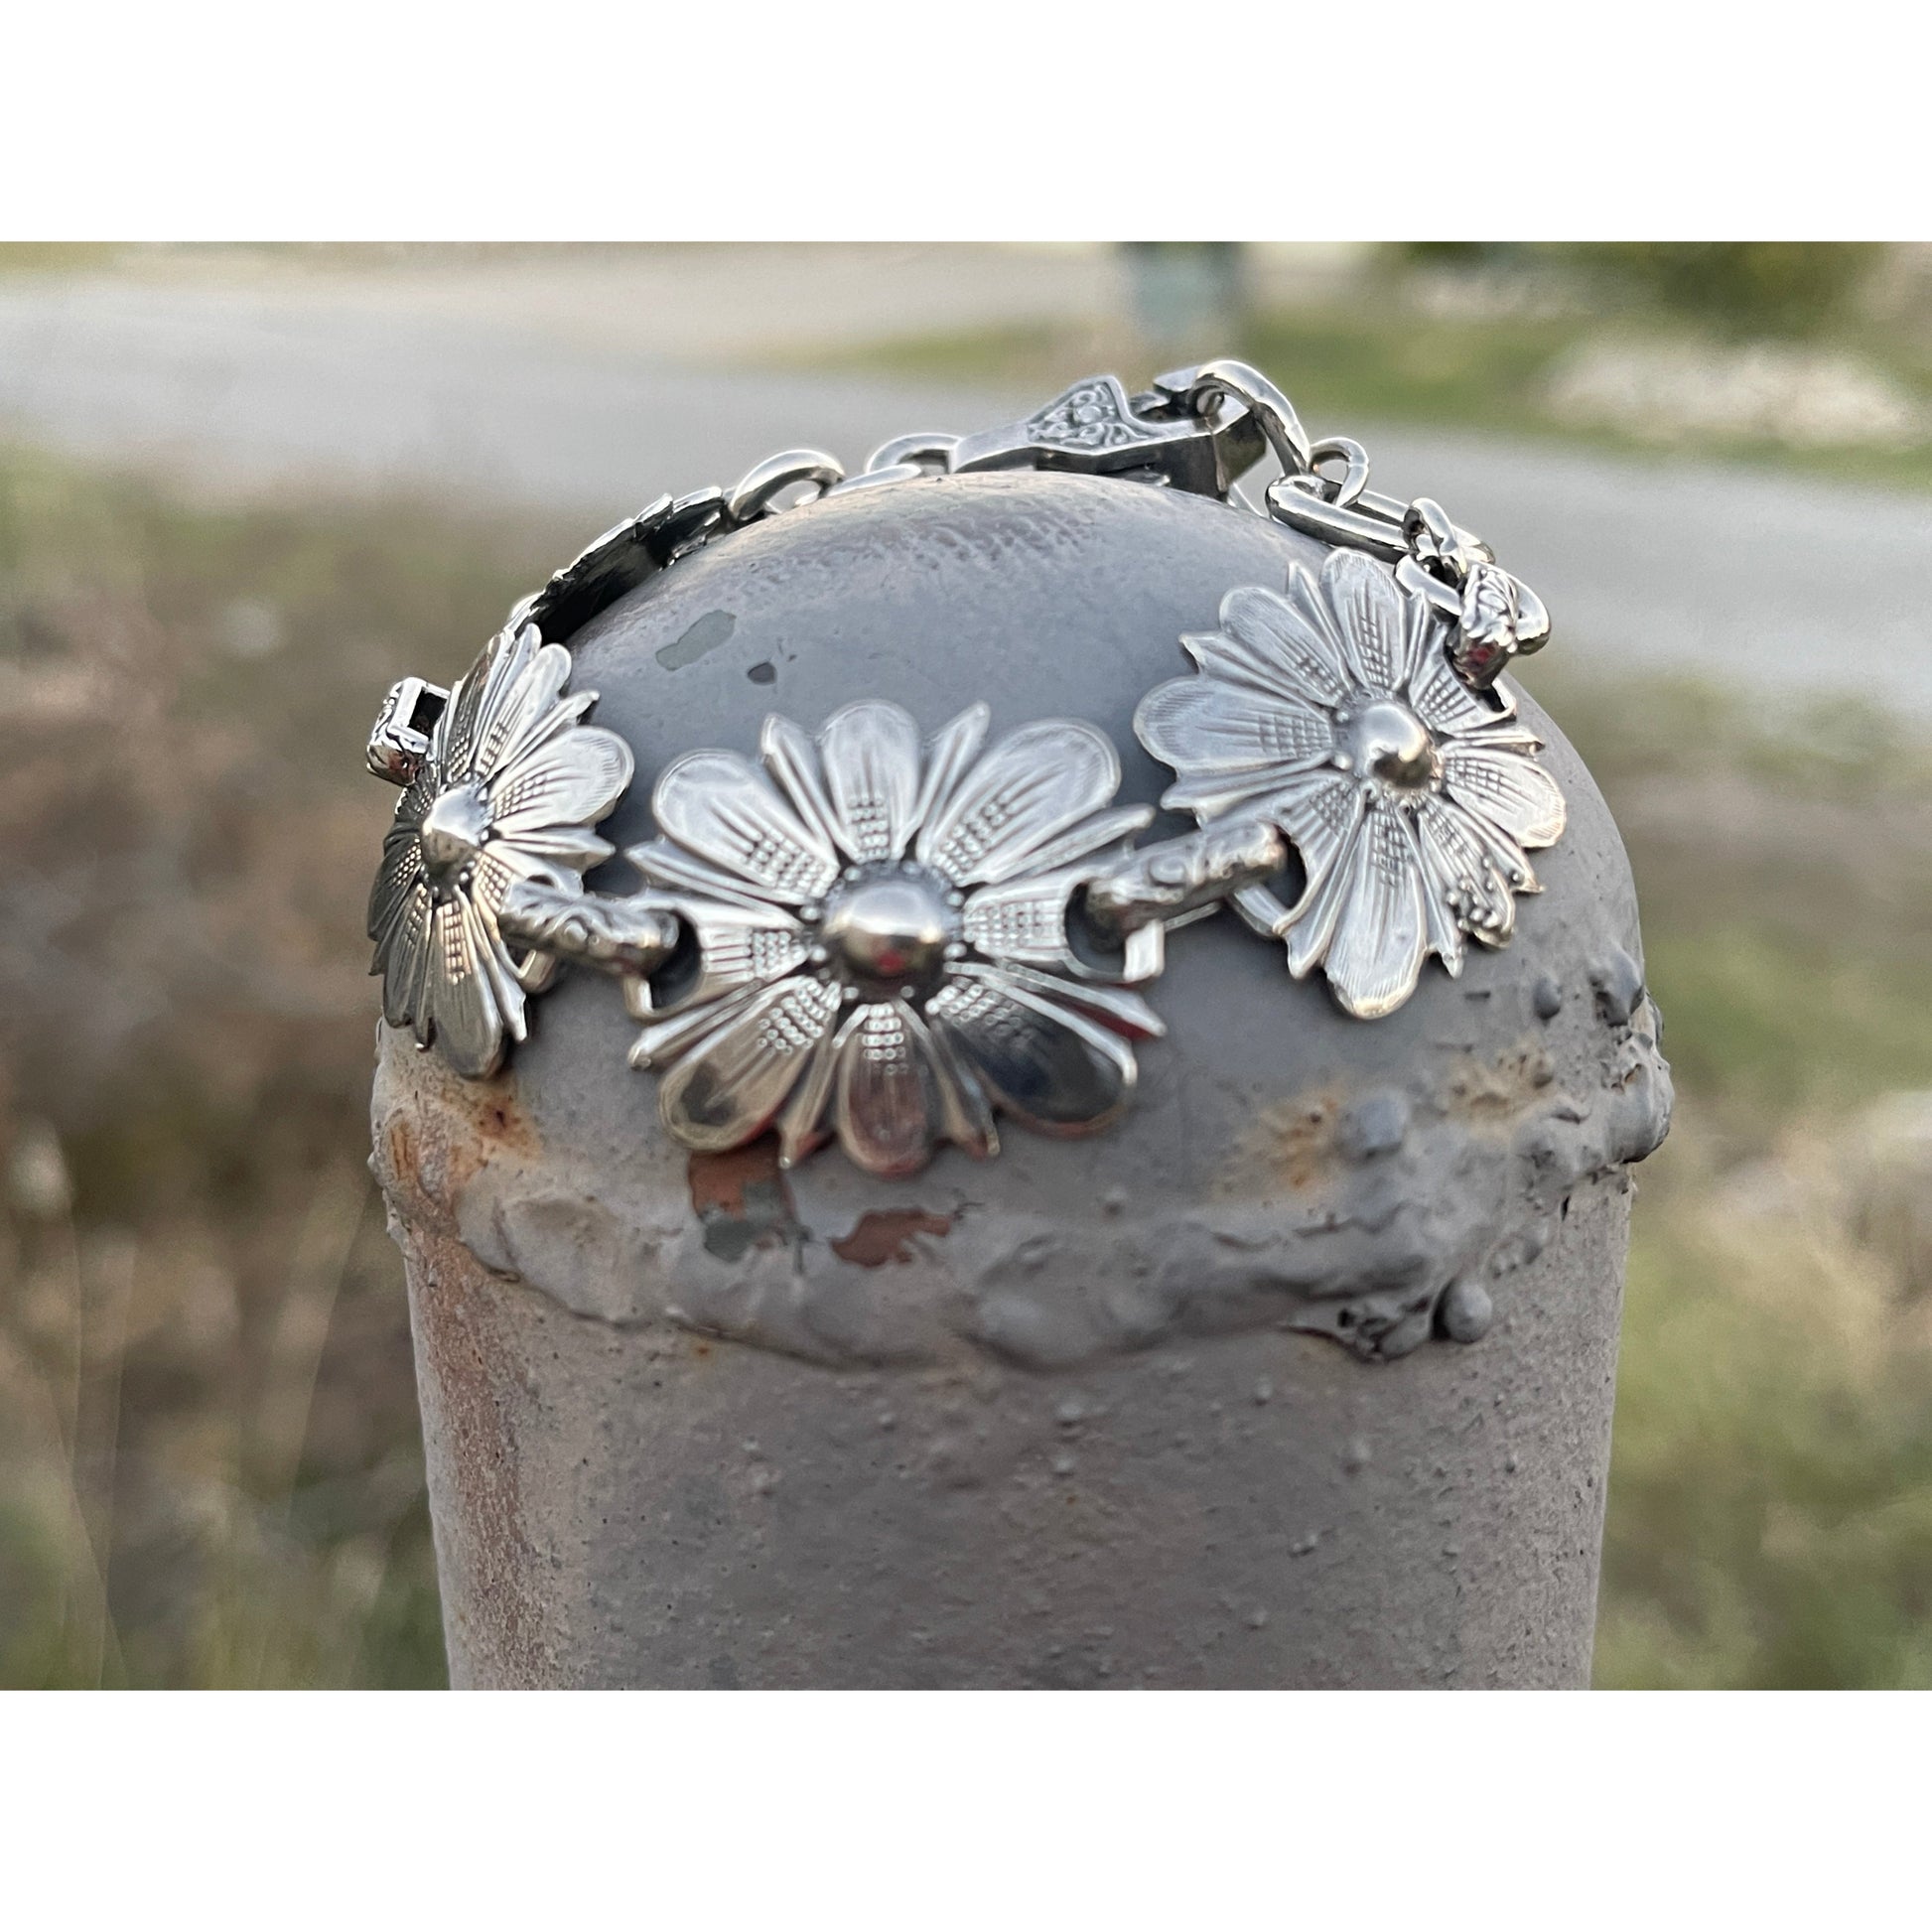 The "Daisy" handmade sterling silver link bracelet features hand engraved flowers connected with small hand engraved links and has our Rockin Out logo on the inter-locking clasp.